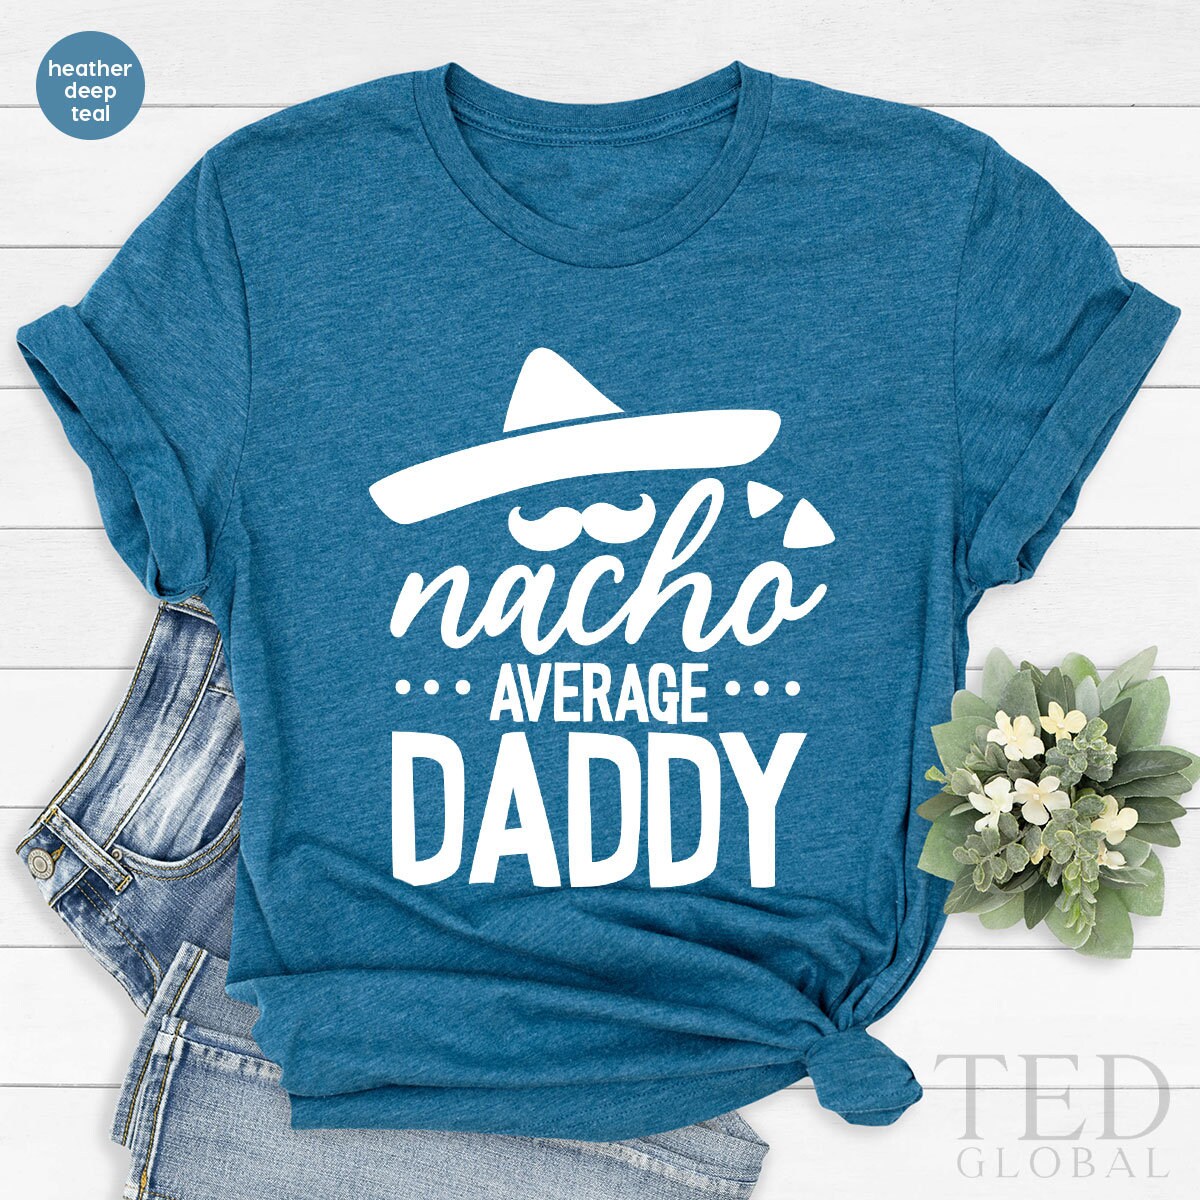 Funny Dad TShirt, Fathers Day Shirt, Nacho Dad Shirt, Fatherhood T Shirt, Dad Birthday Gift, Nacho Average Daddy Tee, Mexican Dad T-Shirt, - Fastdeliverytees.com